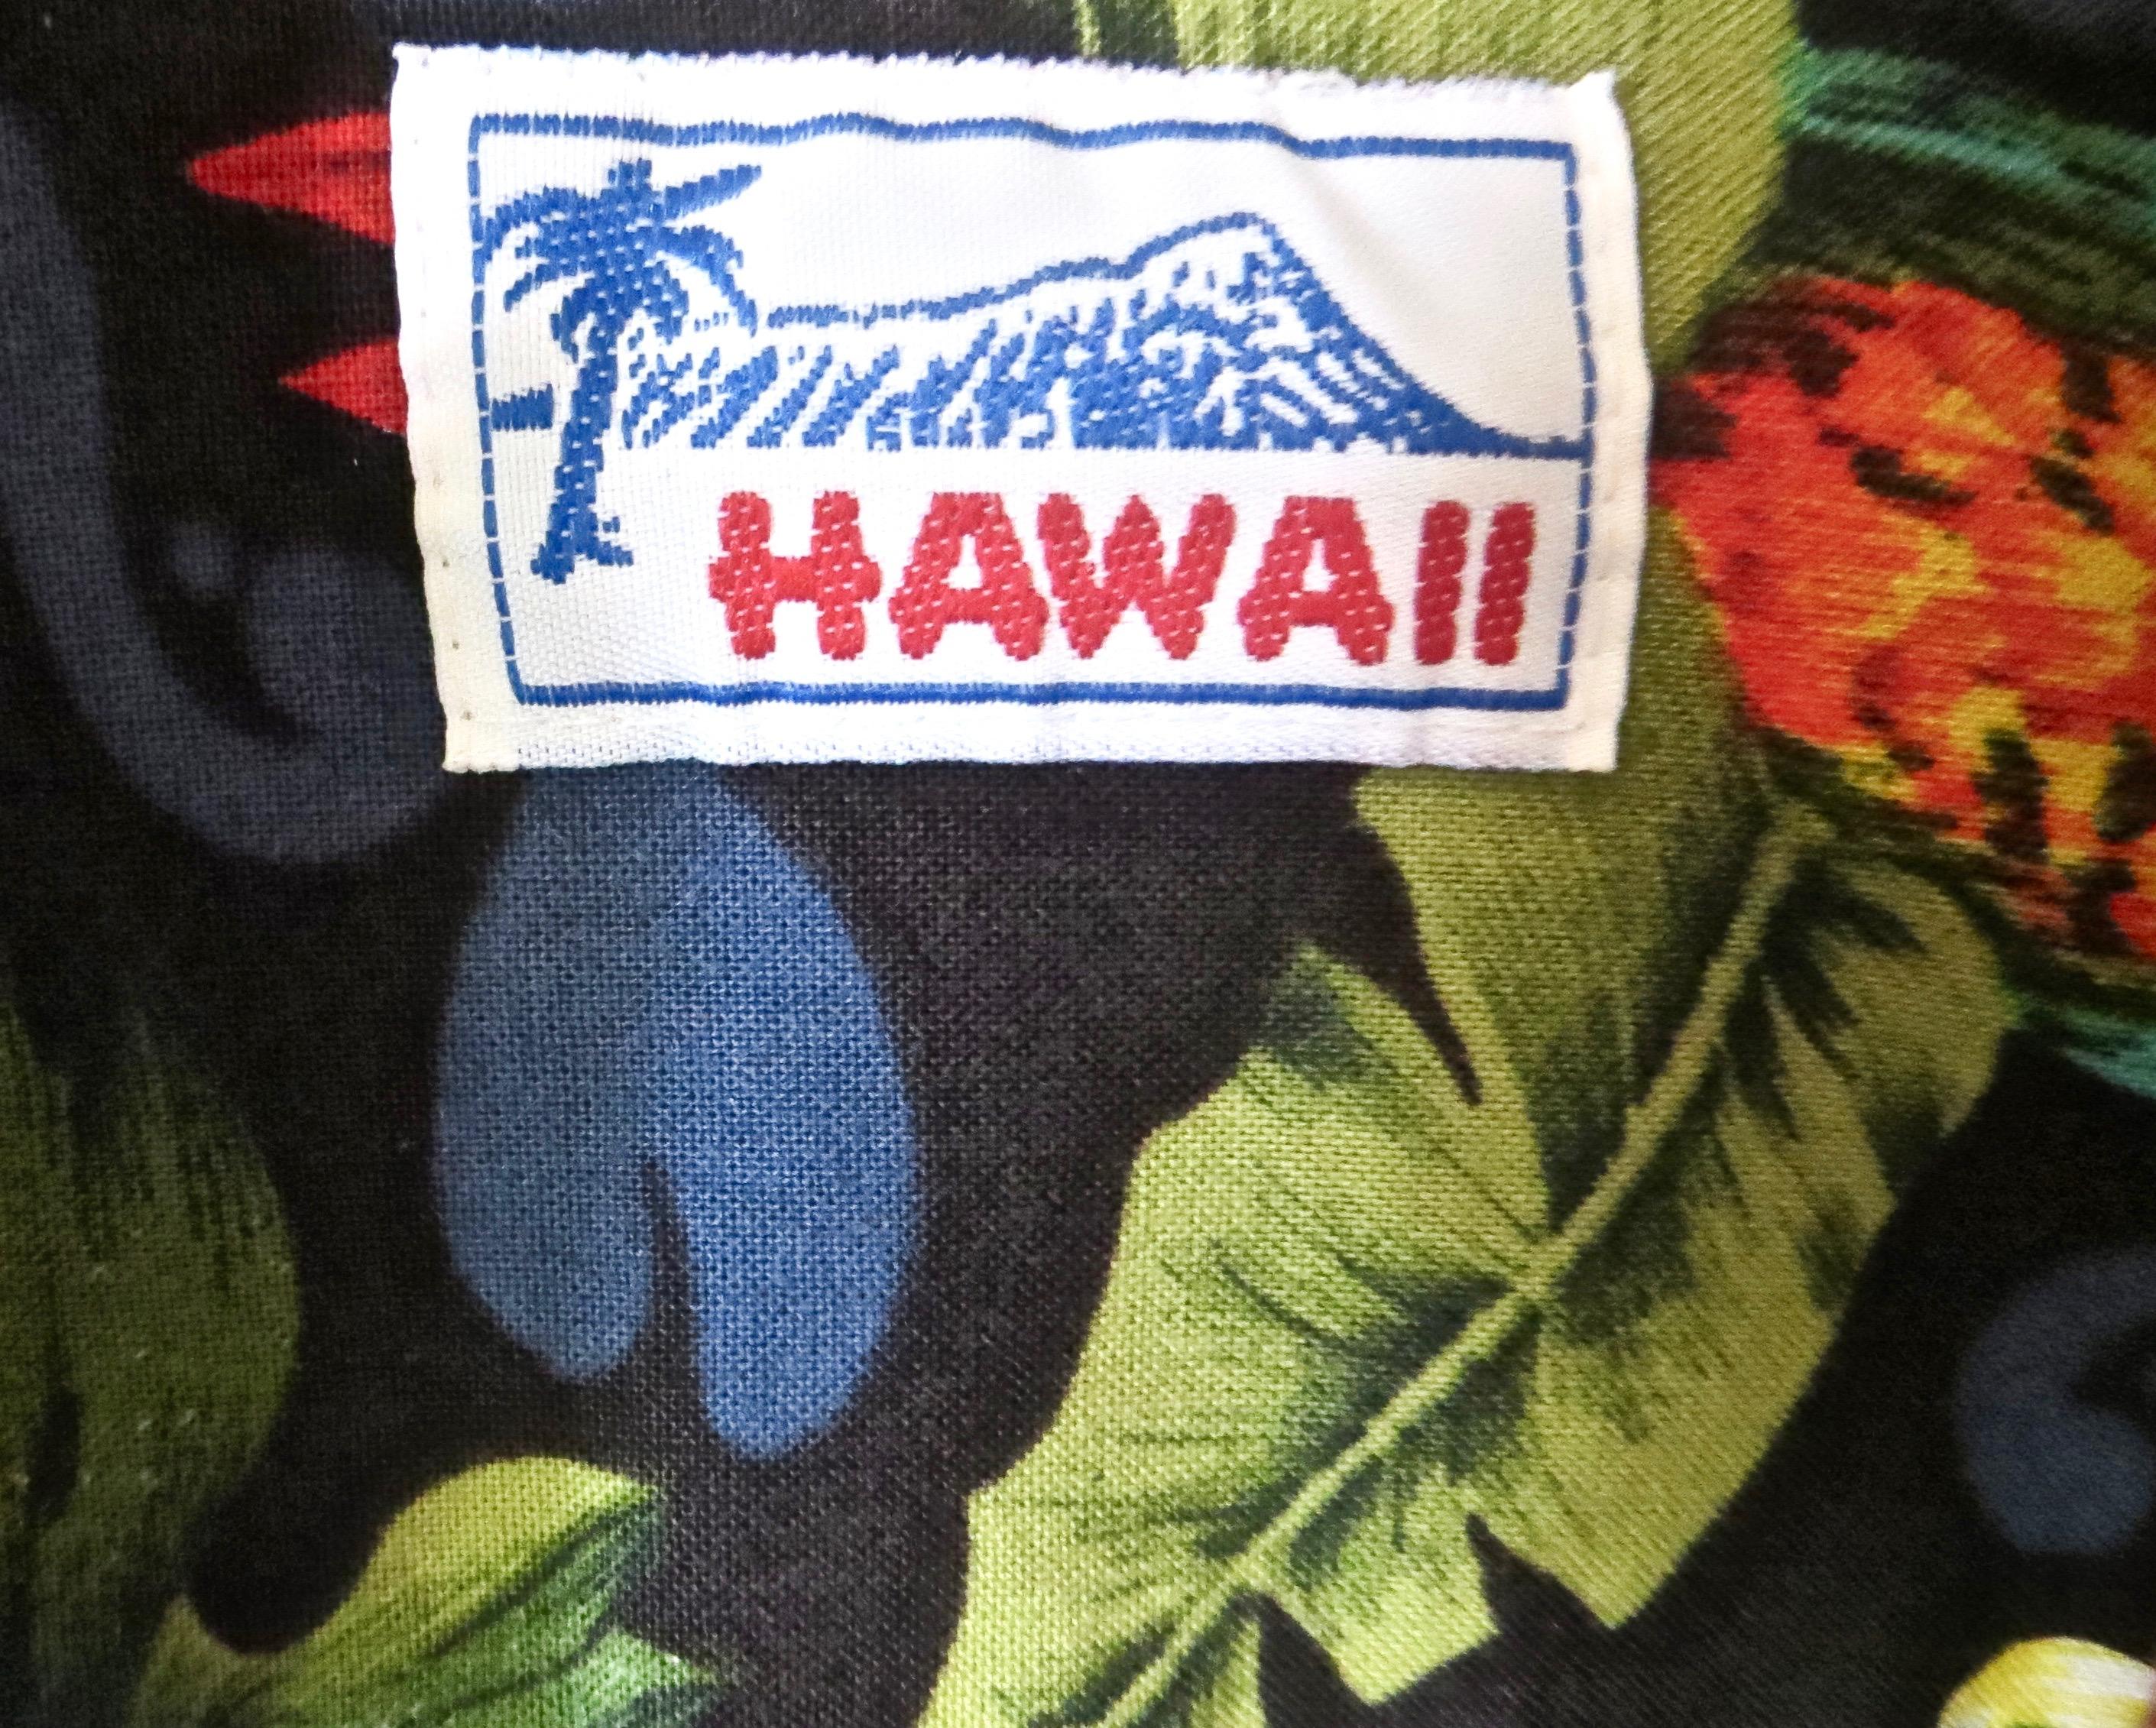 Cotton Hawaiian vintage shirt with flora and fauna theme of Hawaiian islands; including multiple parrots and abundant flowers in a multiplicity of crisp bright colors of blue, red, purple, green, and white; in 